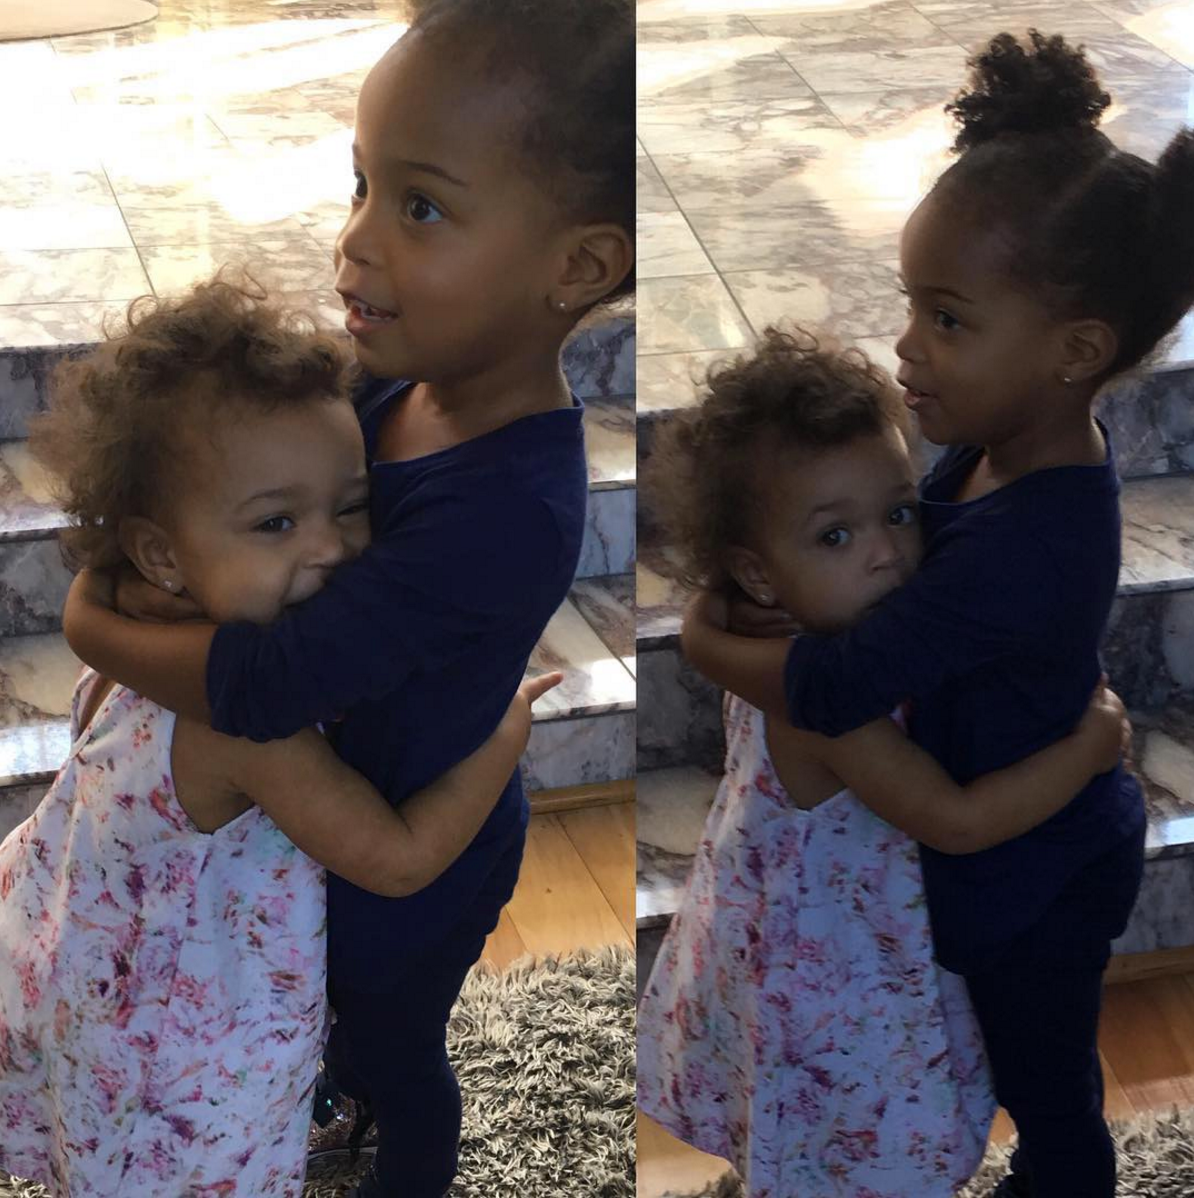 22 Pictures That Prove Ludacris' Daughters Cai And Cadence Are The Cutest Celebrity Siblings Around
